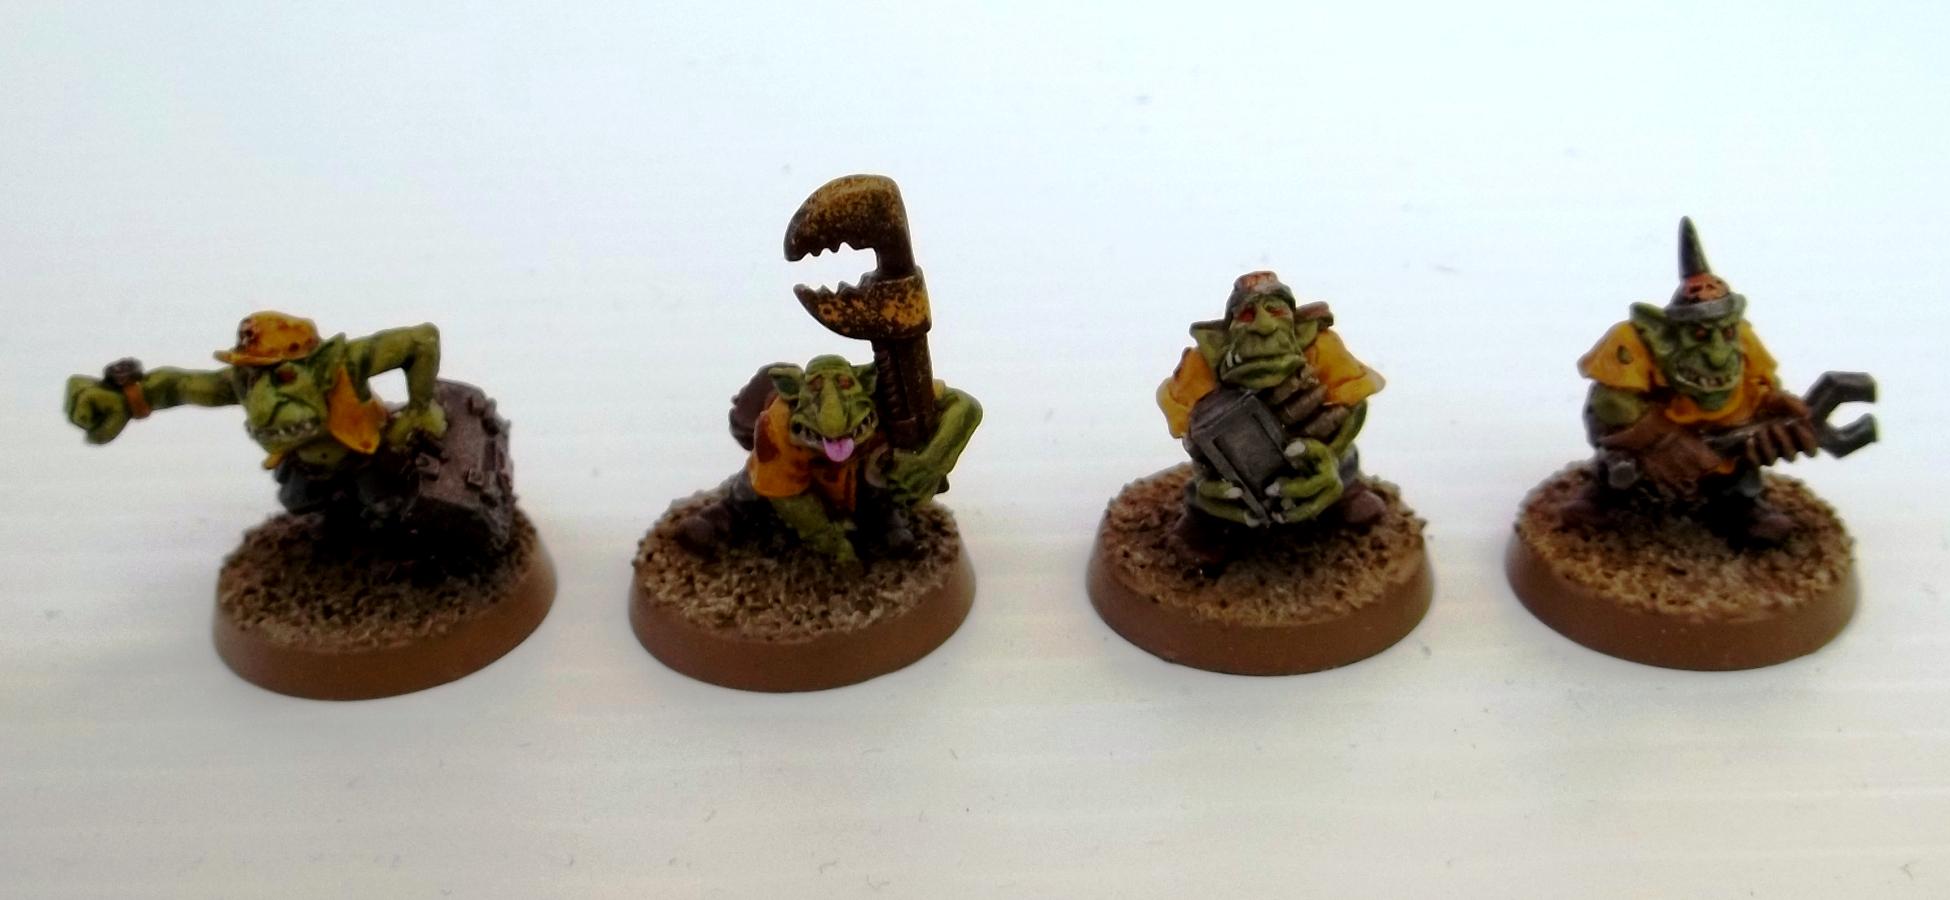 Ammo, Bad, Gretchin, Grots, Krew, Moon, Orks, Toolkit, Wrench